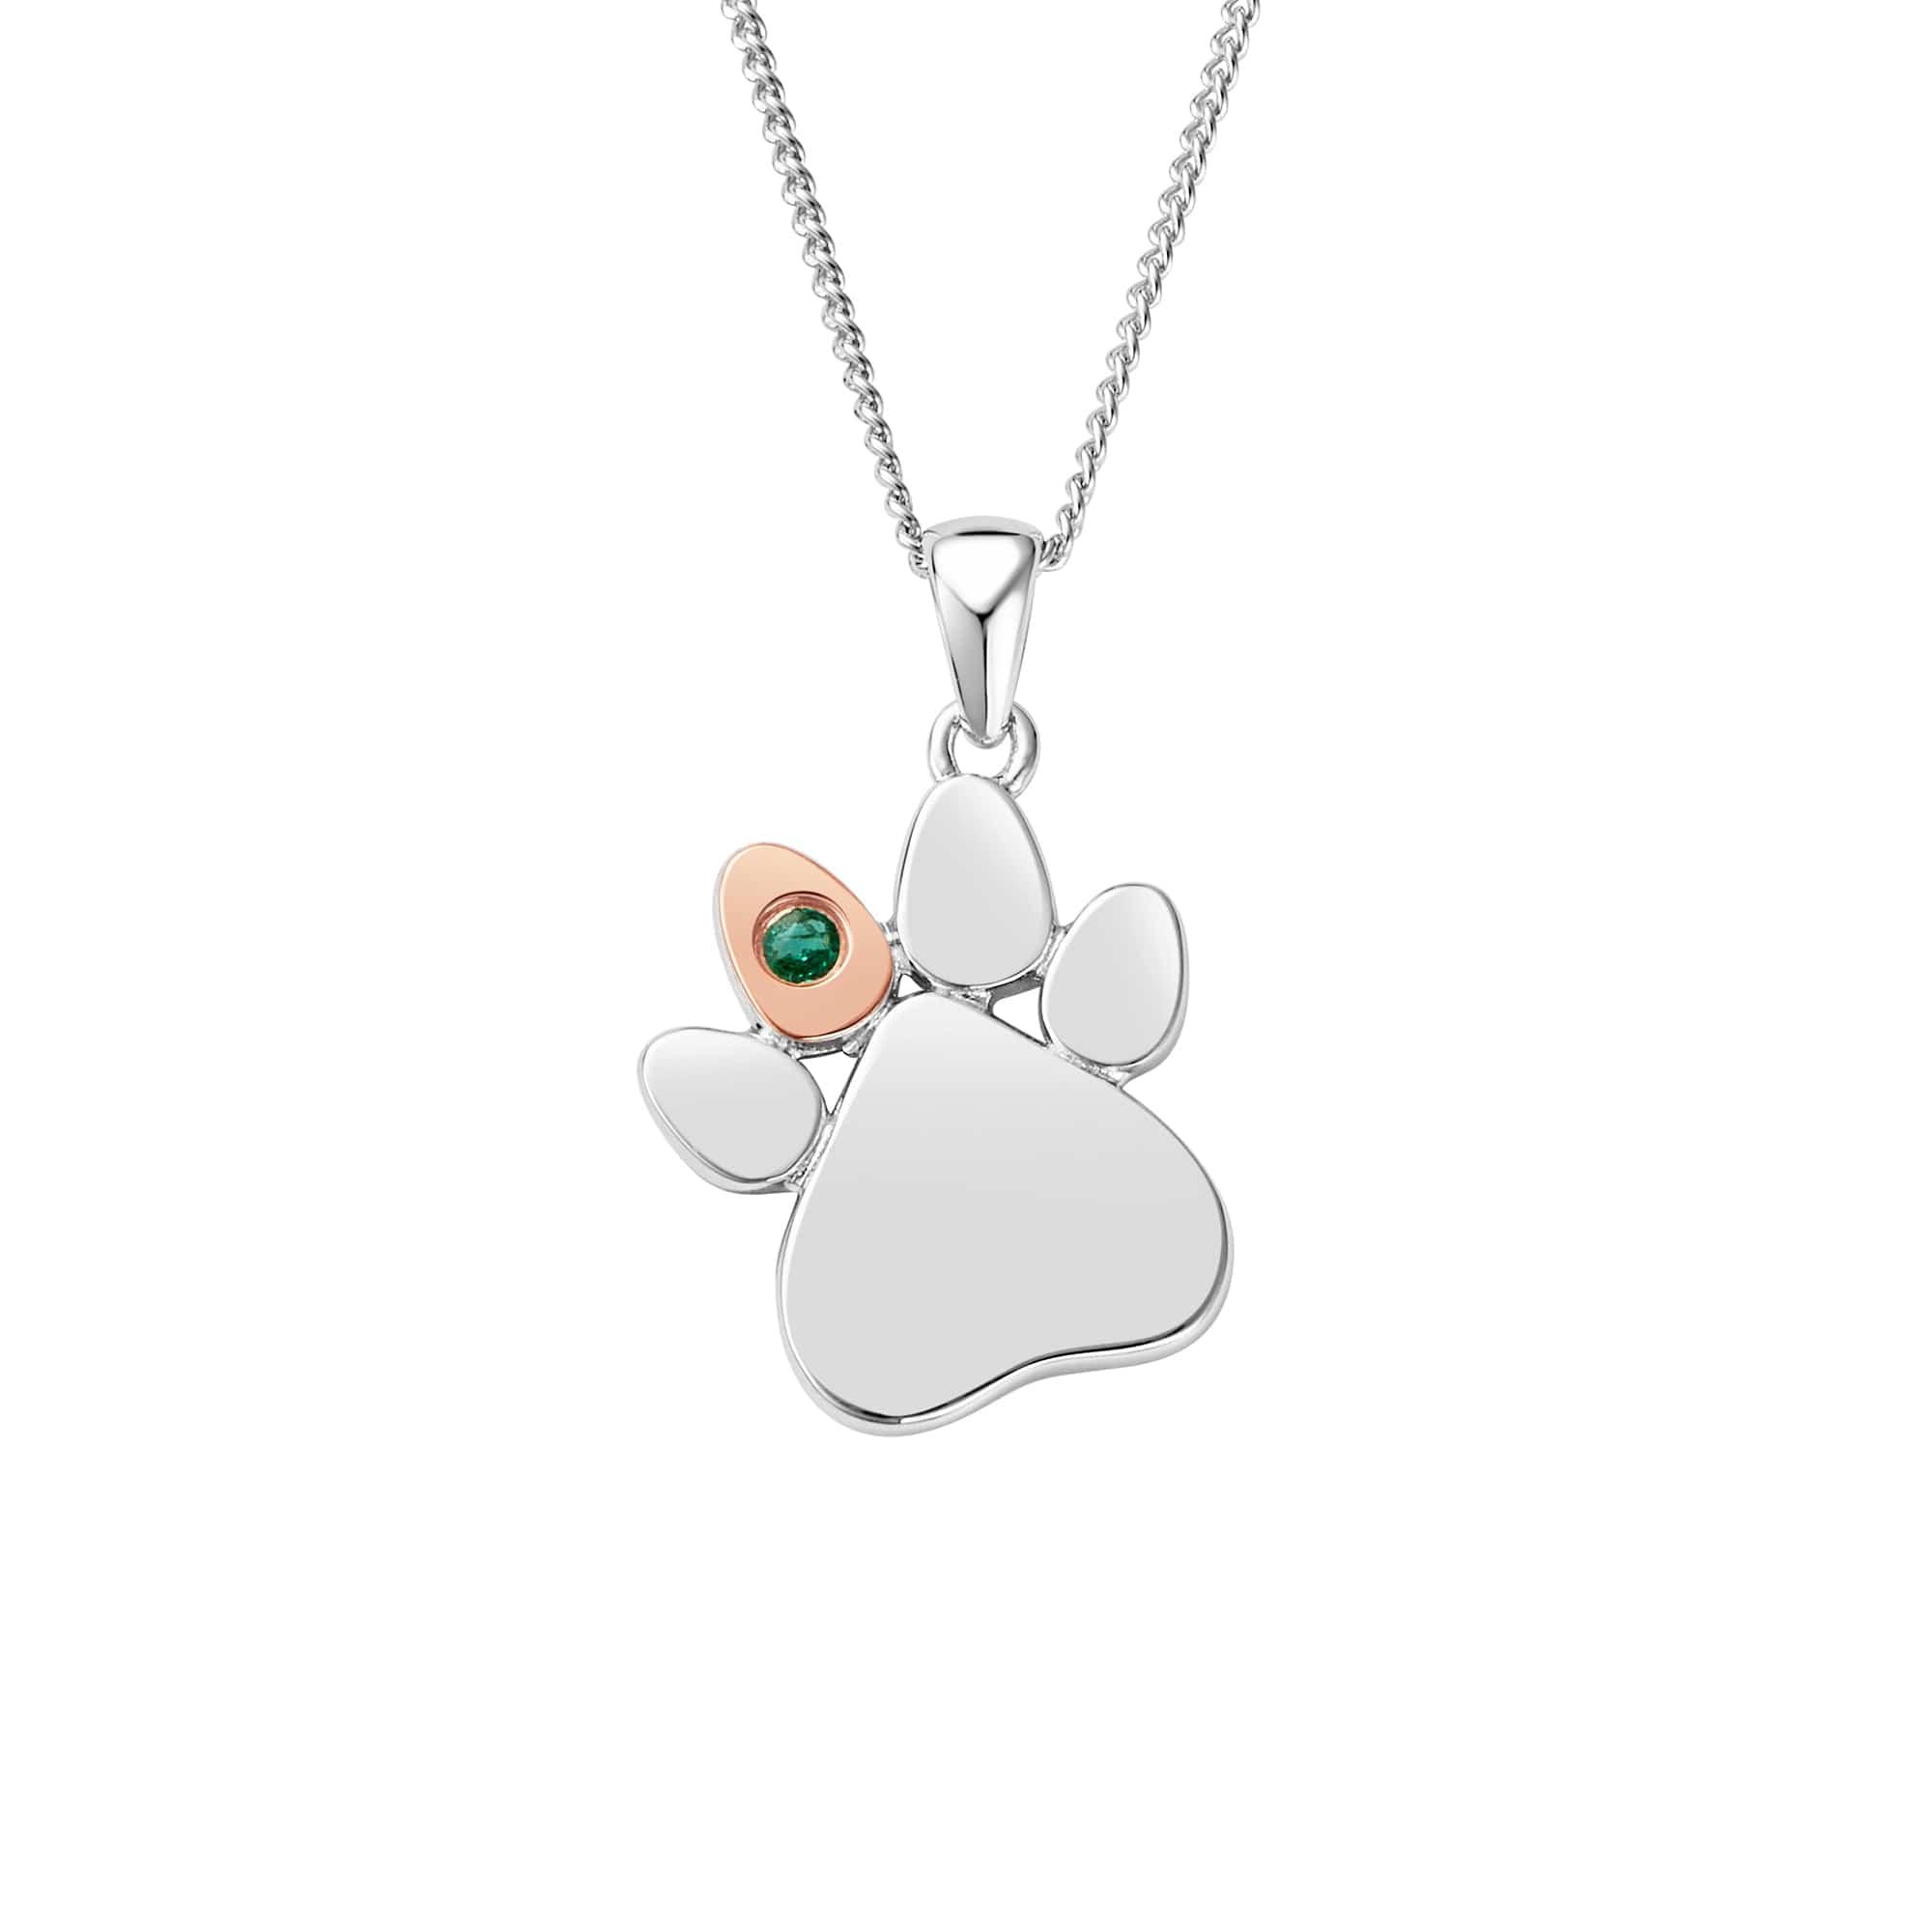 Dog Paw Print Pendant Necklace in Sterling Silver